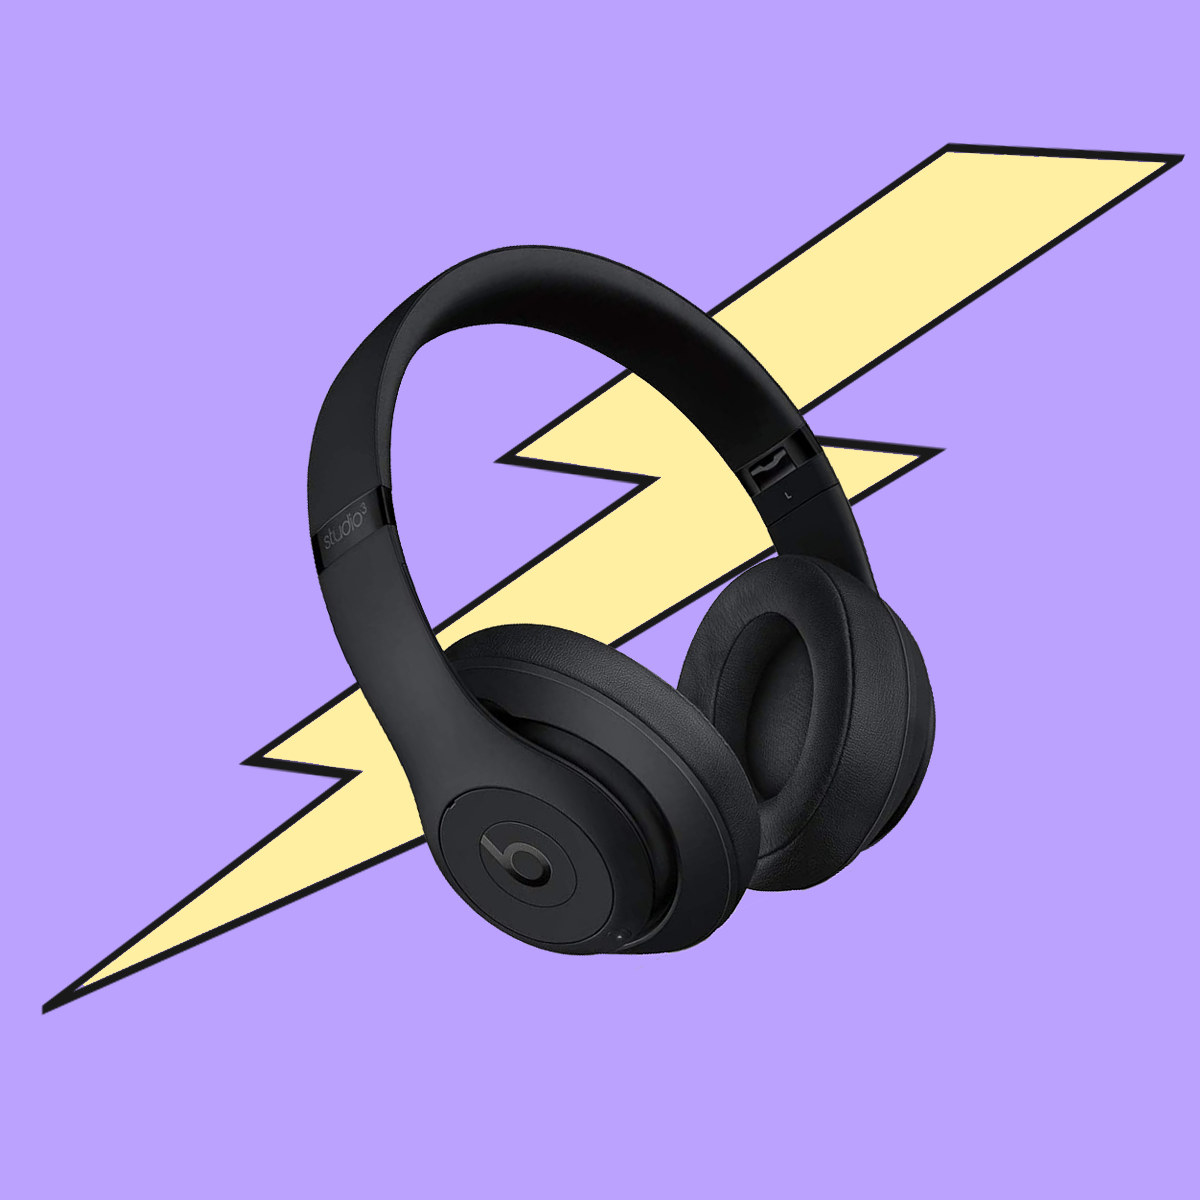 a pair of beats headphones against a background with a lightning bolt